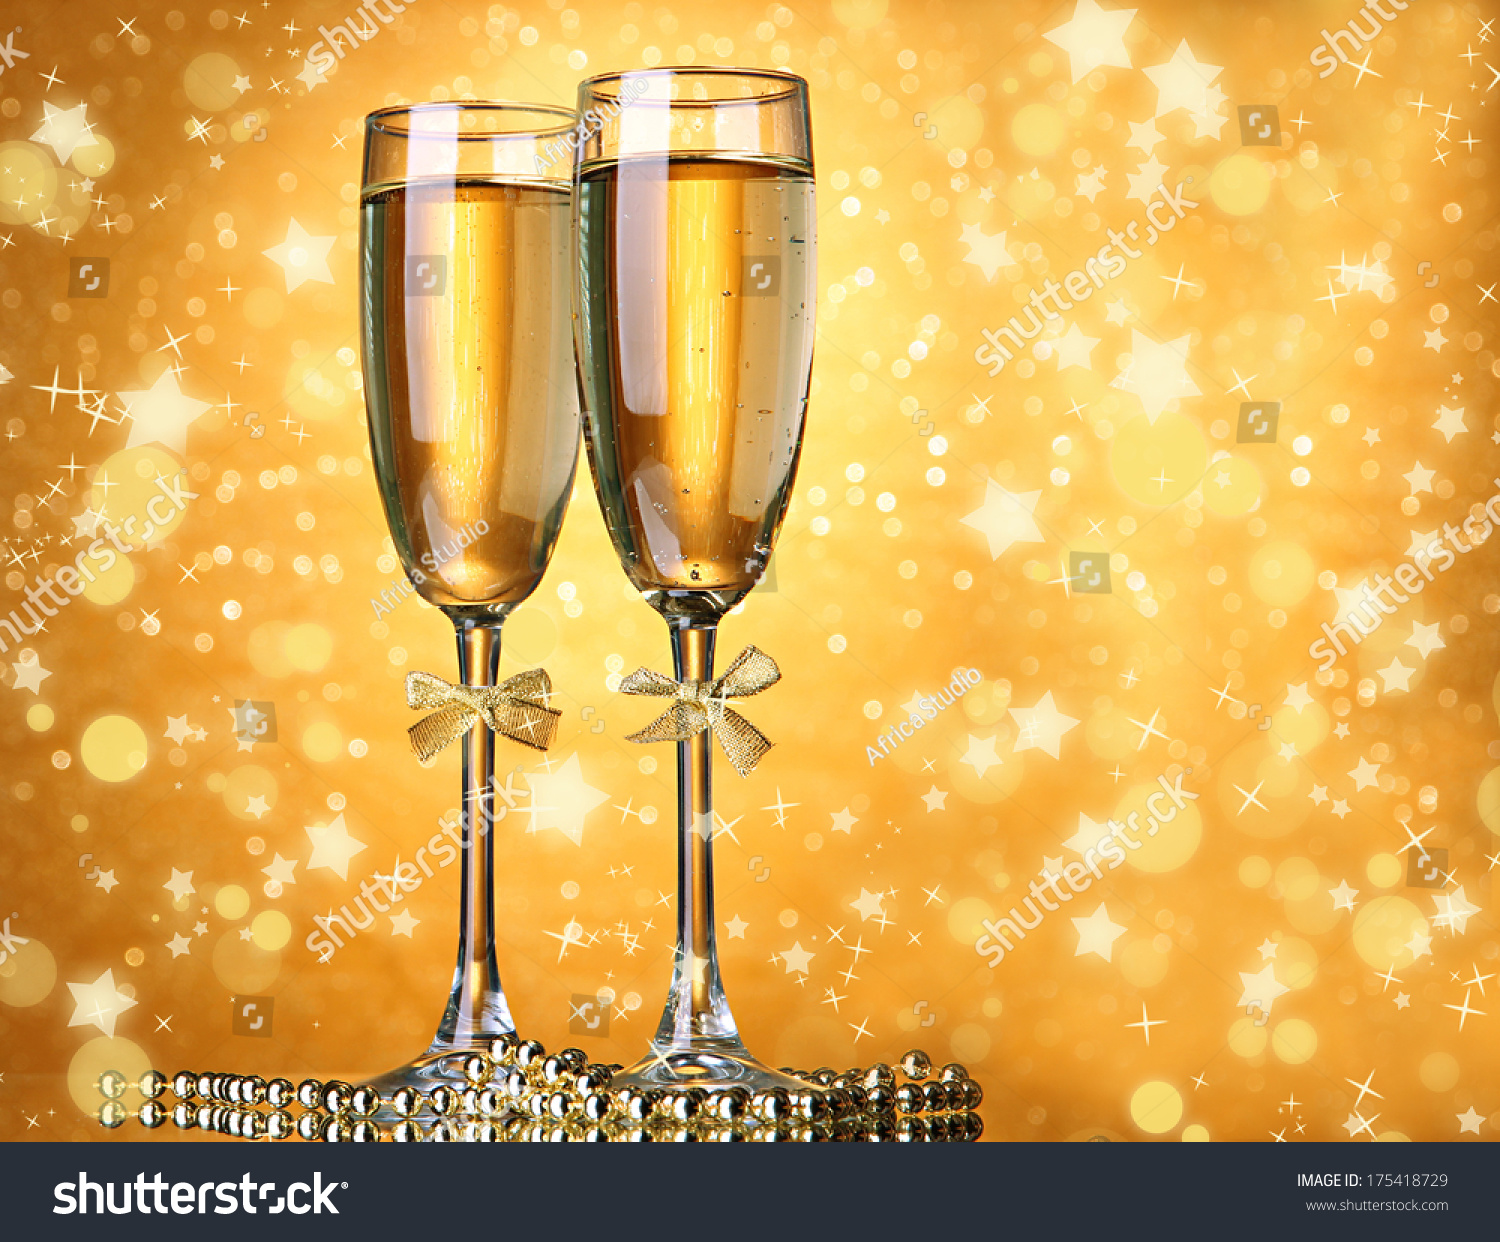 Two glasses of champagne on bright background with lights #175418729